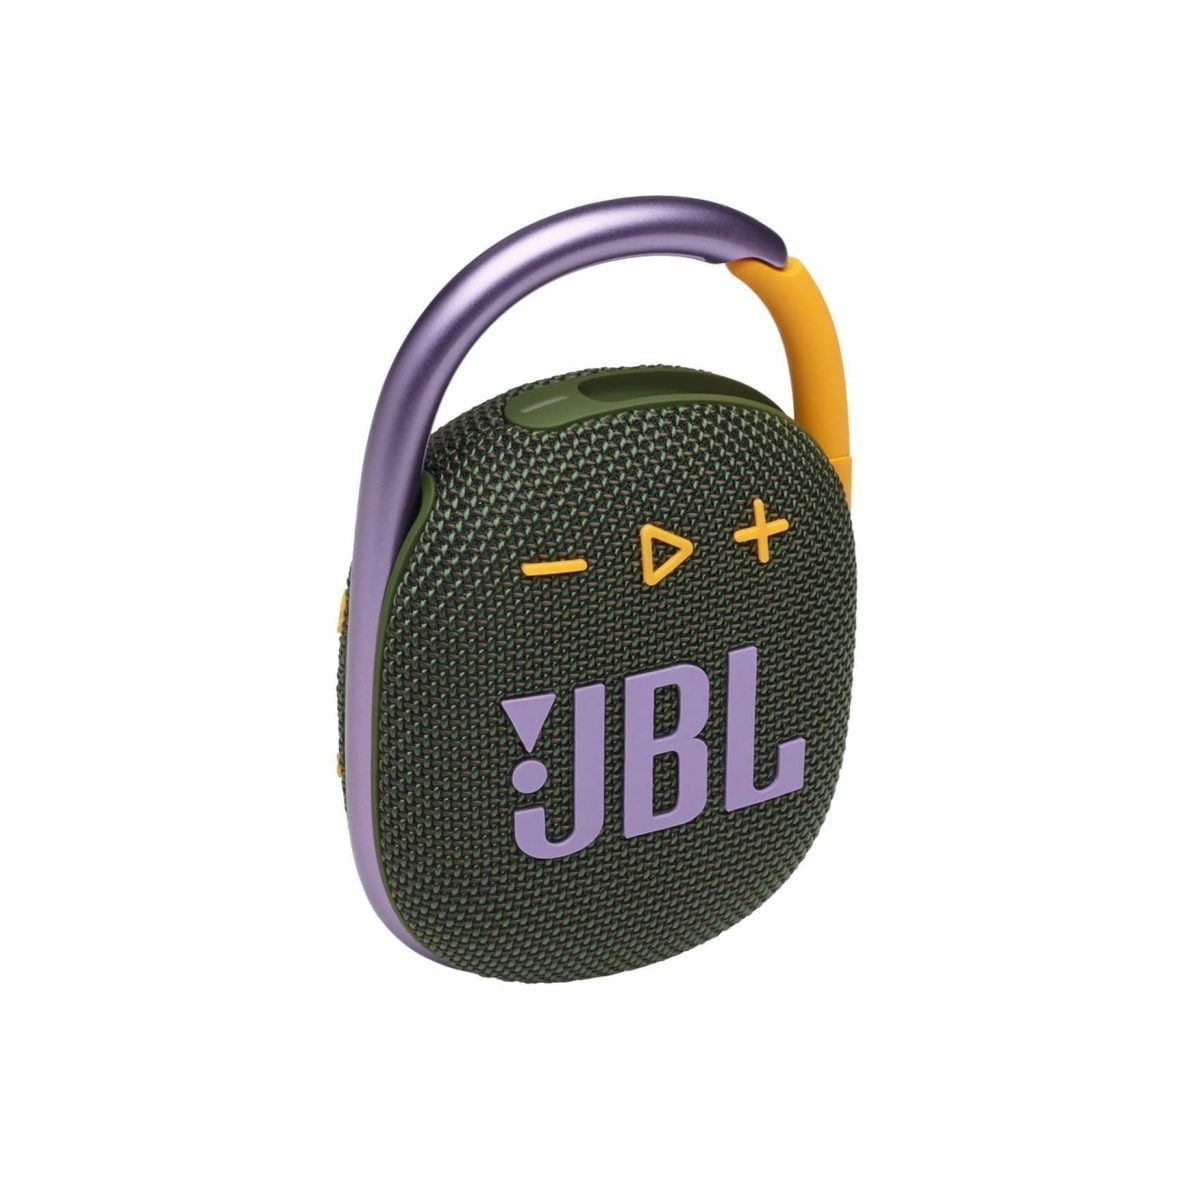 Jbl &Lt;H1&Gt;Jbl Clip4 Ultra-Portable Waterproof Speaker - Green&Lt;/H1&Gt; Https://Www.youtube.com/Watch?V=Vufgwfbax_K Clip And Play Cool, Portable, And Waterproof. The Vibrant Fresh Looking Jbl Clip 4 Delivers Surprisingly Rich Jbl Original Pro Sound In A Compact Package. The Unique Oval Shape Fits Easy In Your Hand. Fully Wrapped In Colorful Fabrics With Expressive Details Inspired By Current Street Fashion, It’s Easy To Match Your Style. The Fully Integrated Carabiner Hooks Instantly To Bags, Belts, Or Buckles, To Bring Your Favorite Tunes Anywhere. Waterproof, Dustproof, And Up To 10 Hours Of Playtime, It’s Rugged Enough To Tag Along Wherever You Explore. &Nbsp; Jbl Clip4 Jbl Clip4 Ultra-Portable Waterproof Speaker - Green